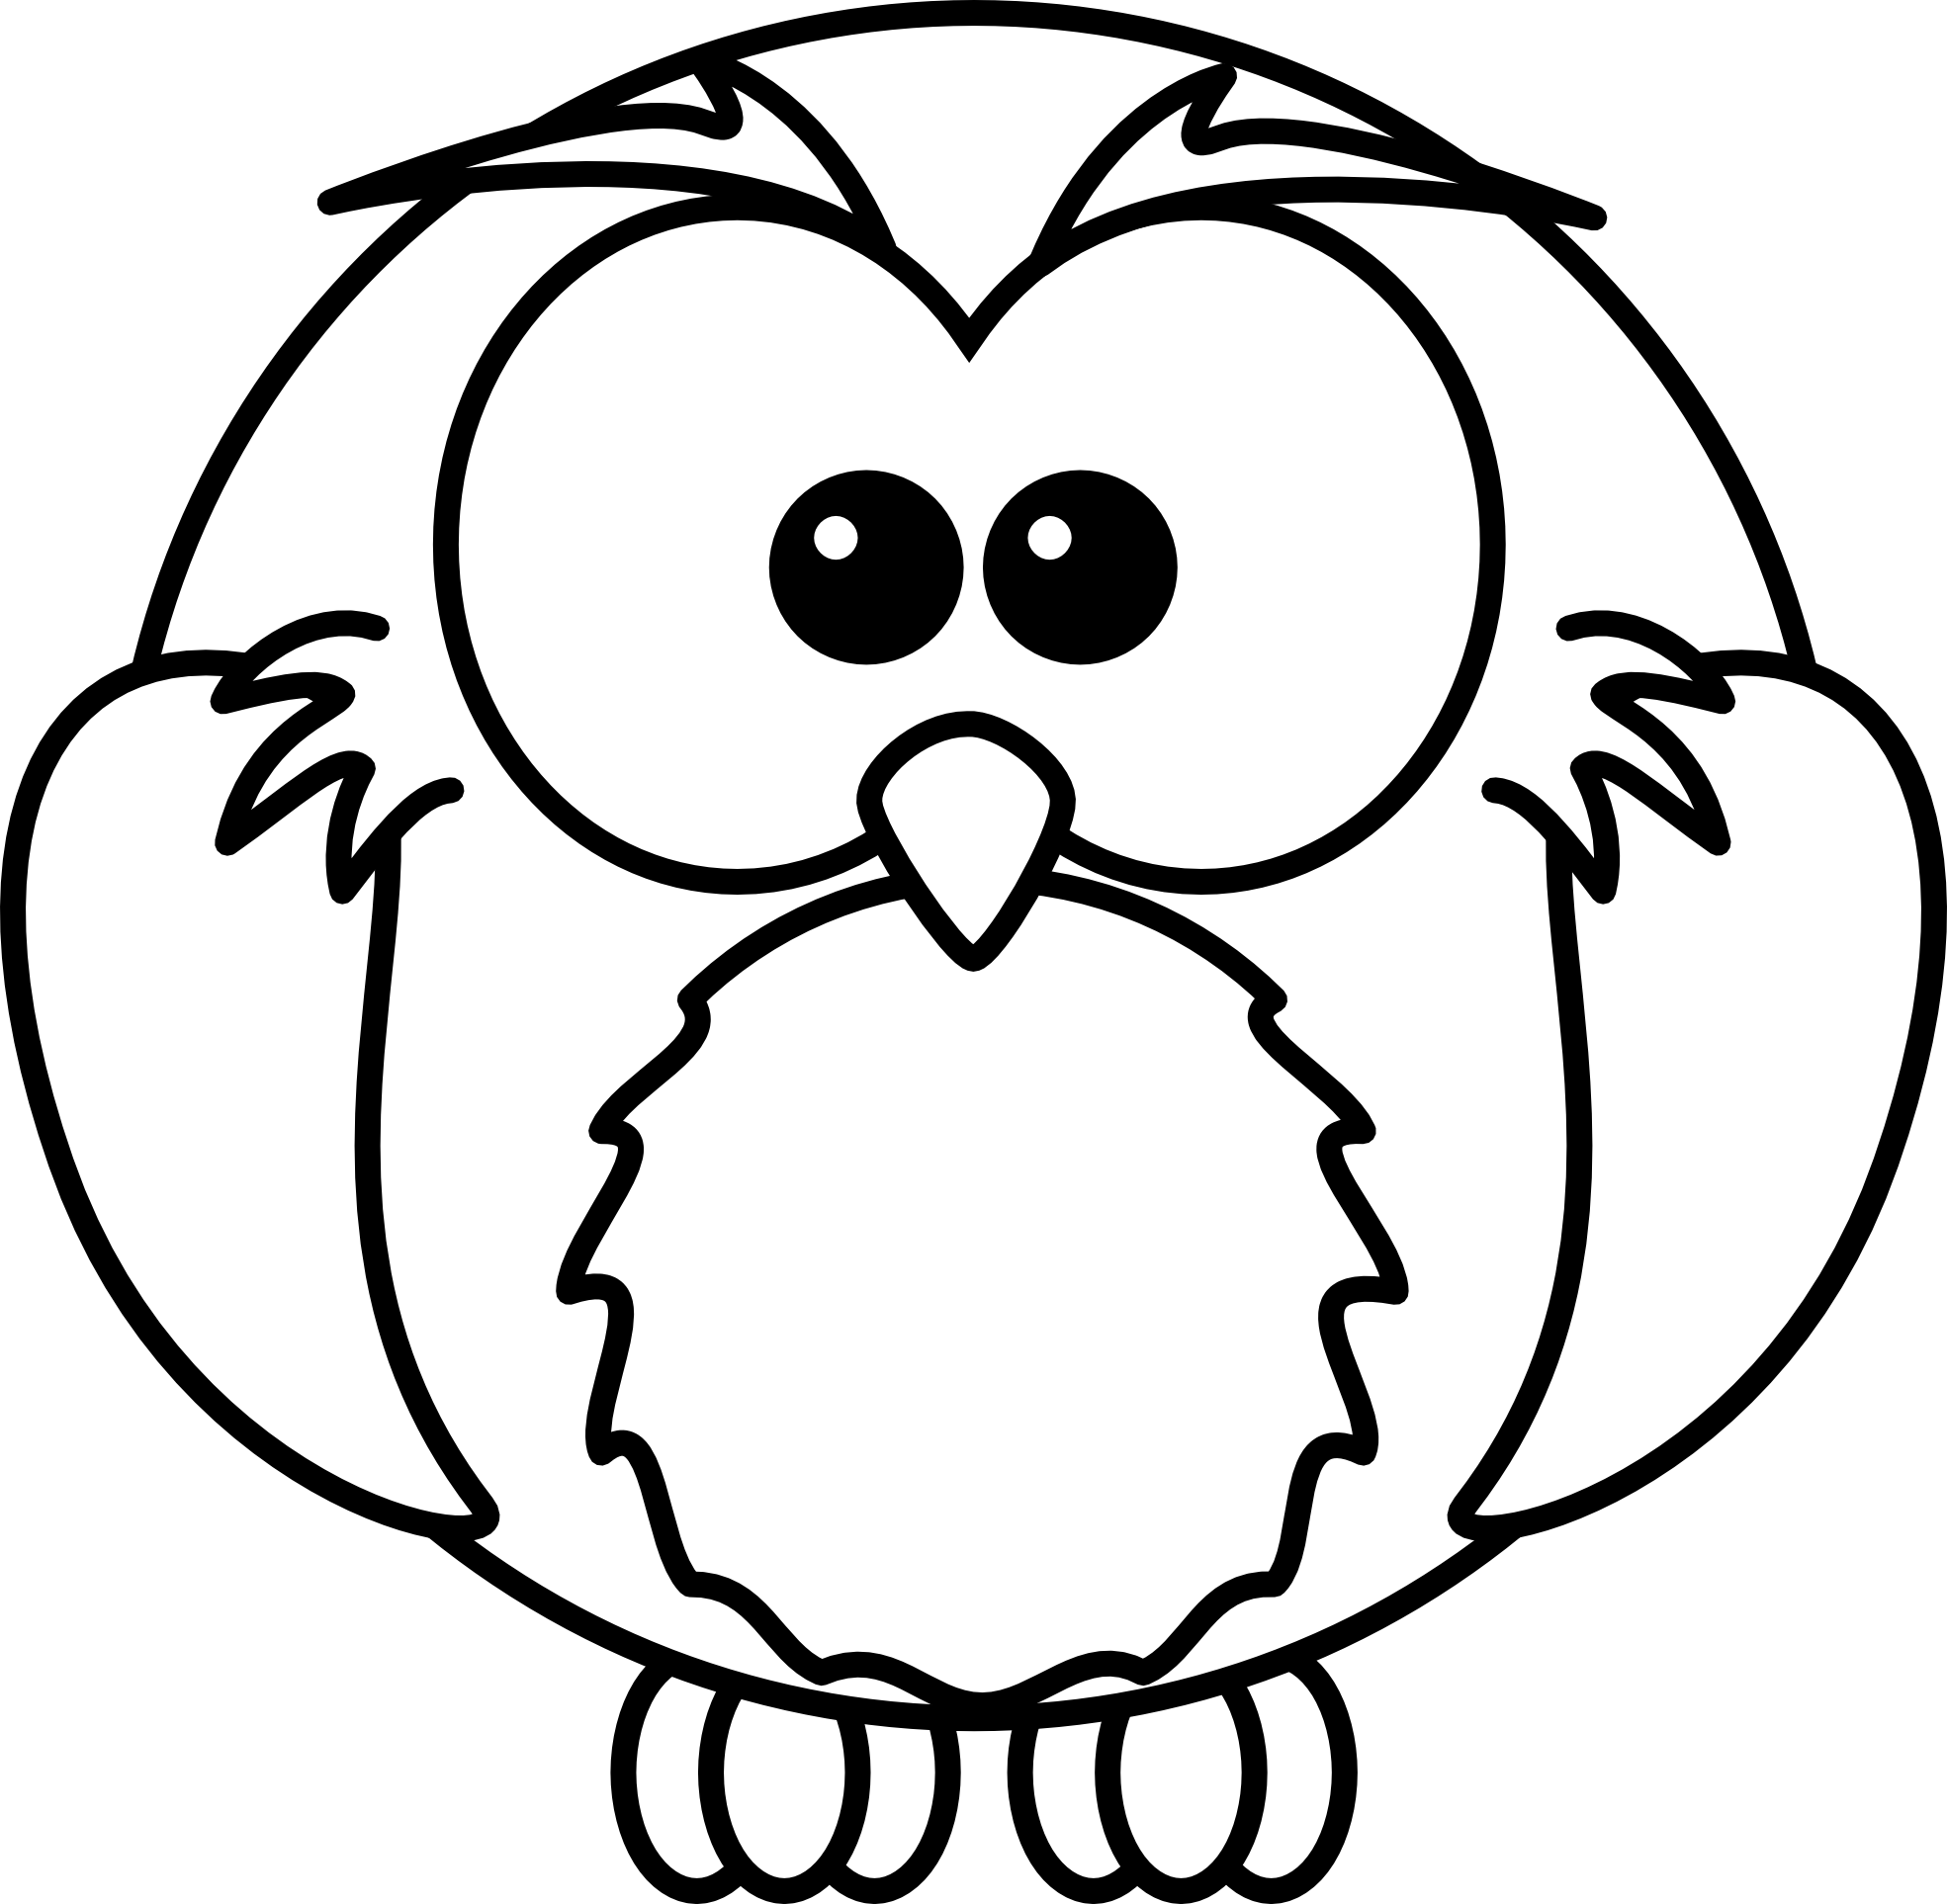 Free black and white. Clipart owl body